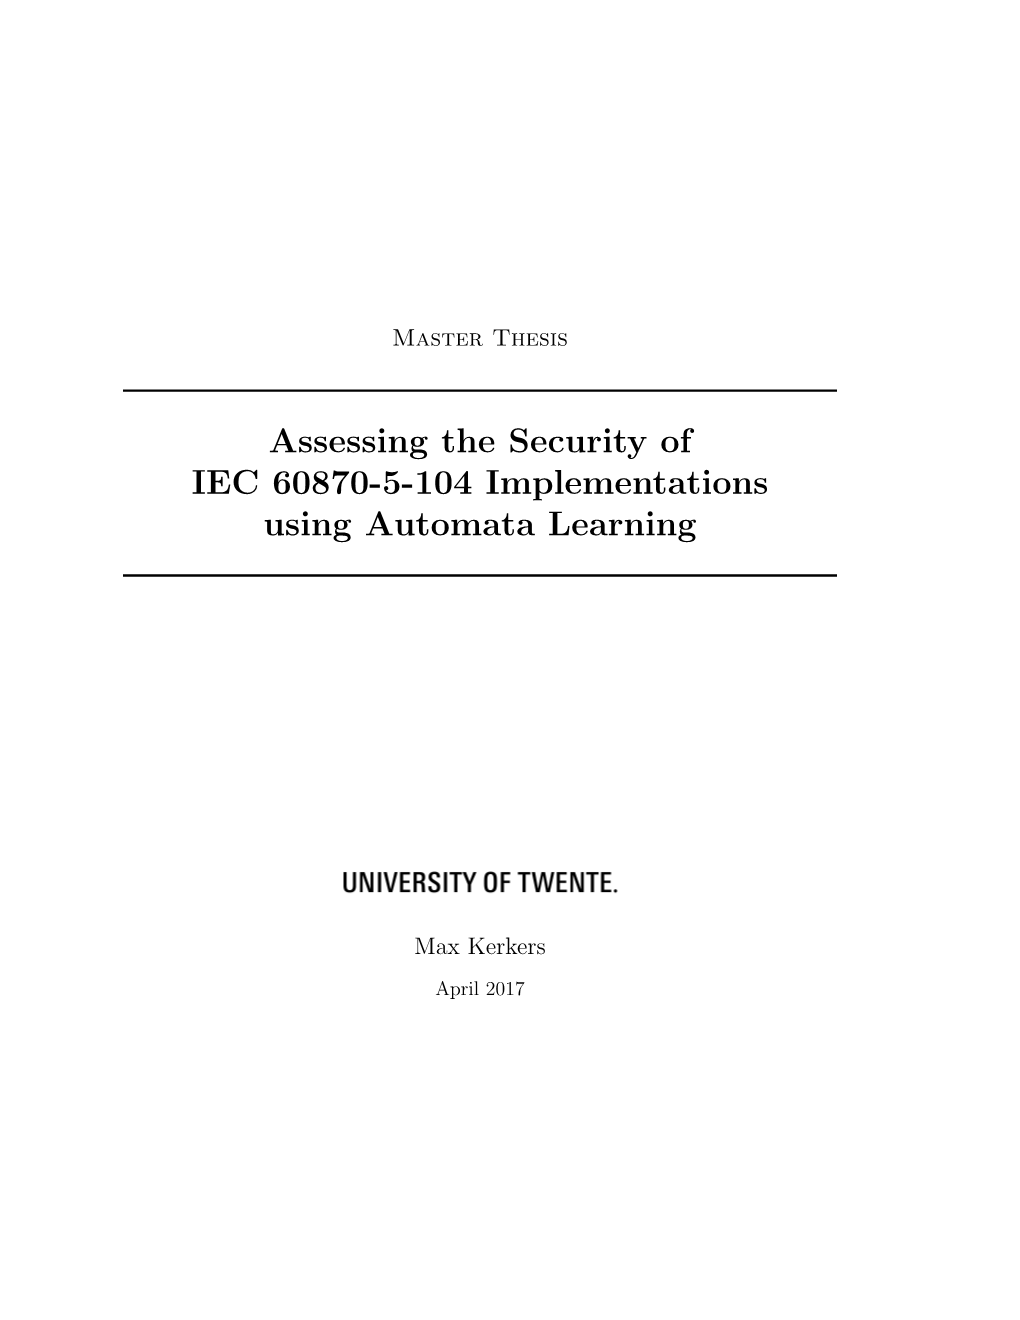 Assessing the Security of IEC 60870-5-104 Implementations Using Automata Learning